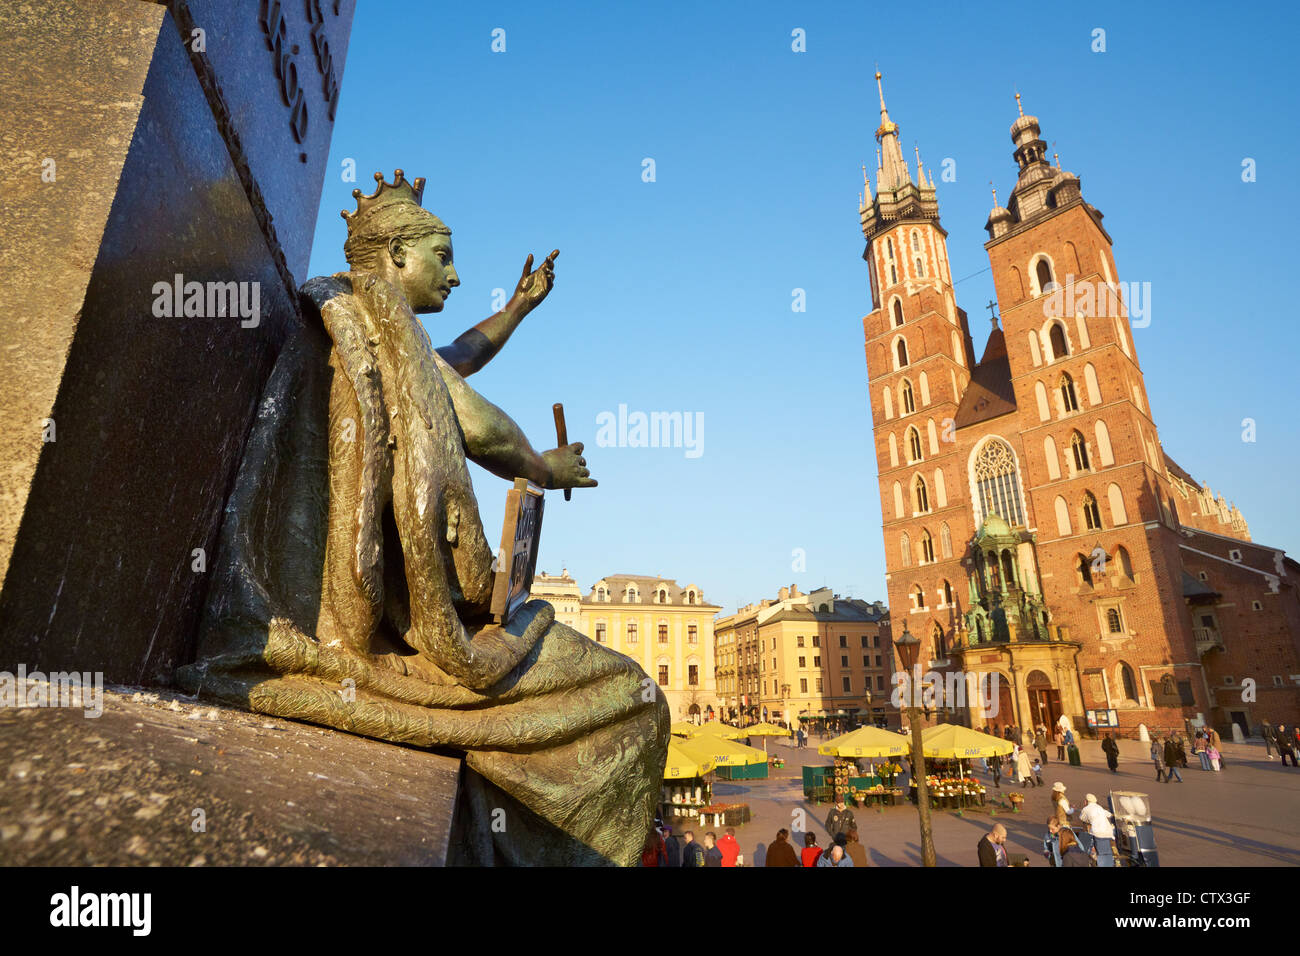 Cracow - a part of Adam Mickiewicz Monument and Church, St. Mary's Church, Krakow (Cracow), Poland (UNESCO) Stock Photo